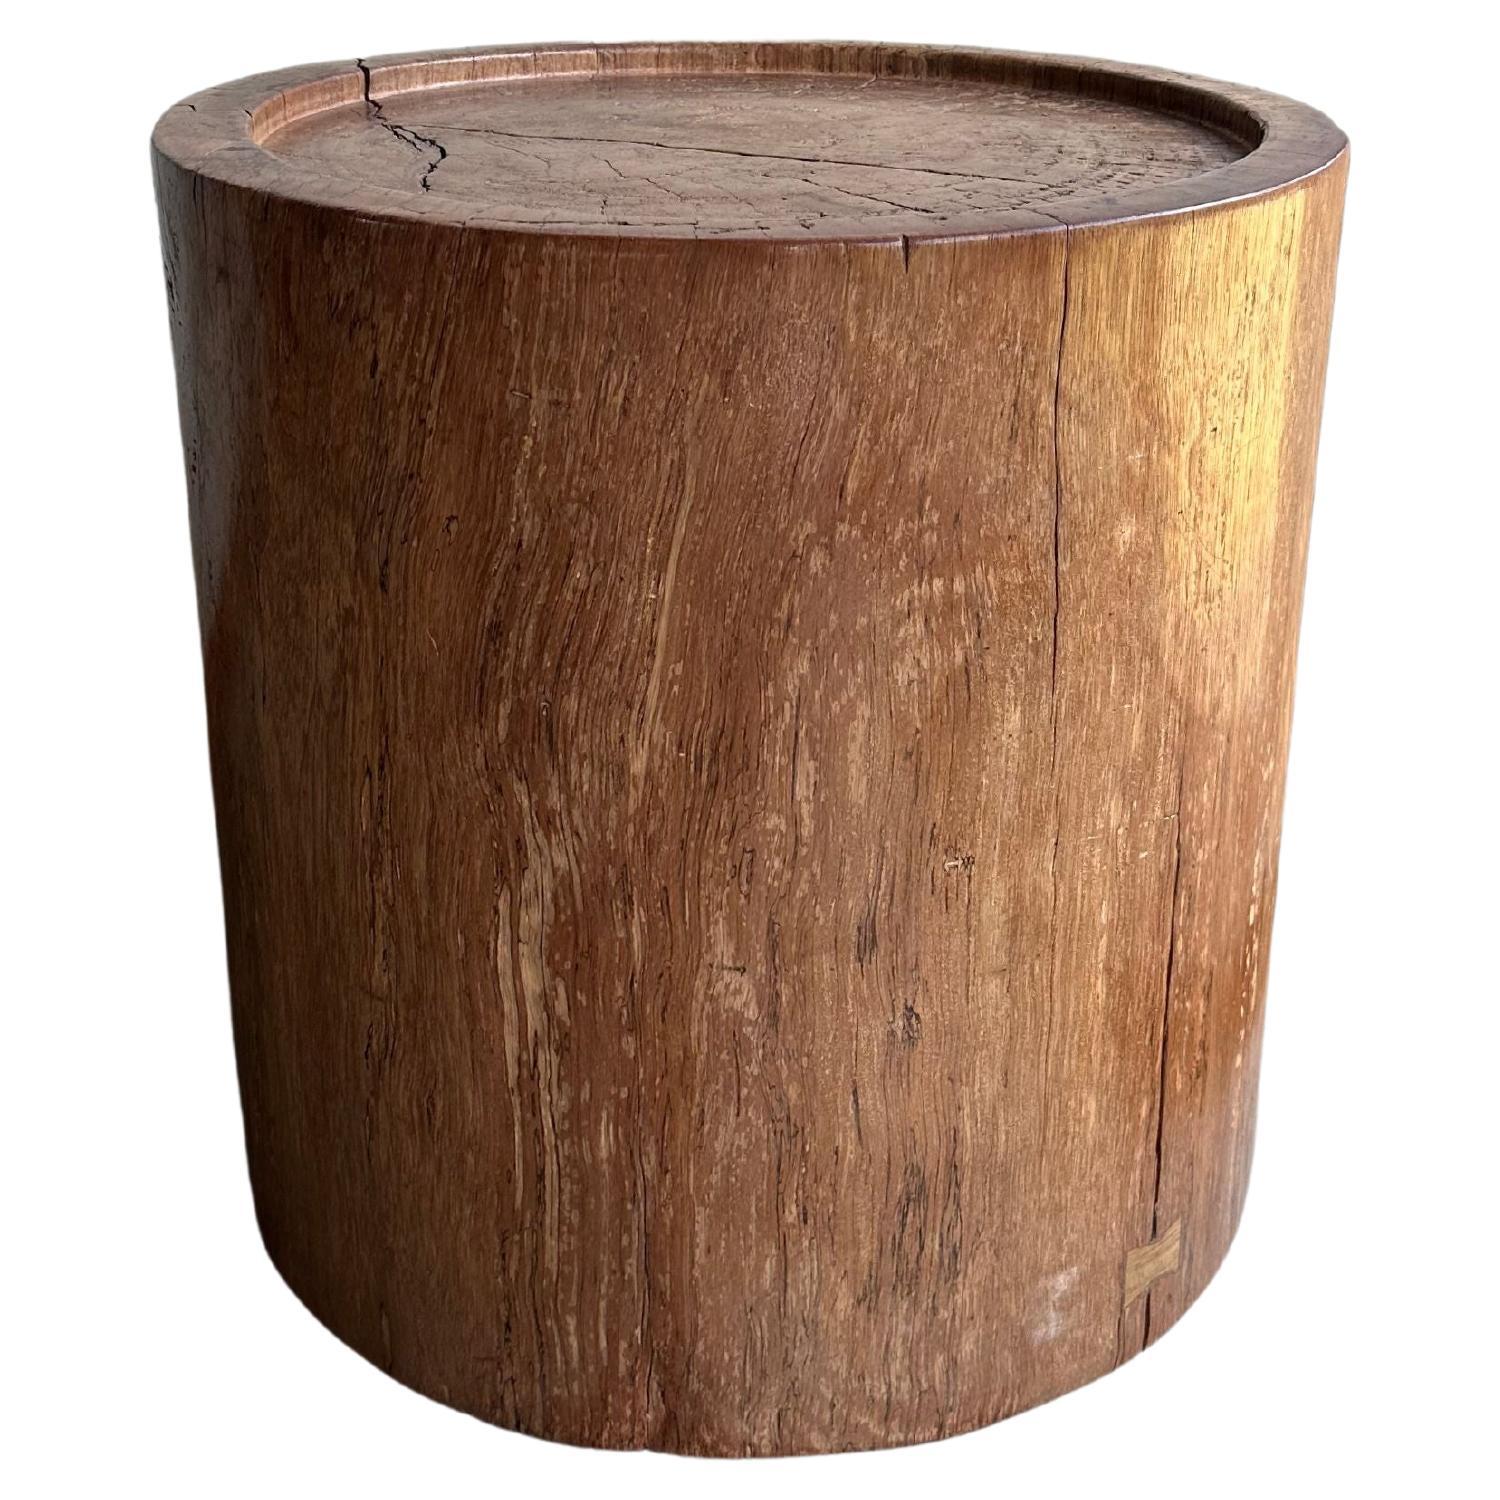 Sculptural Meranti Wood Side Table, with Stunning Wood Textures, Modern Organic